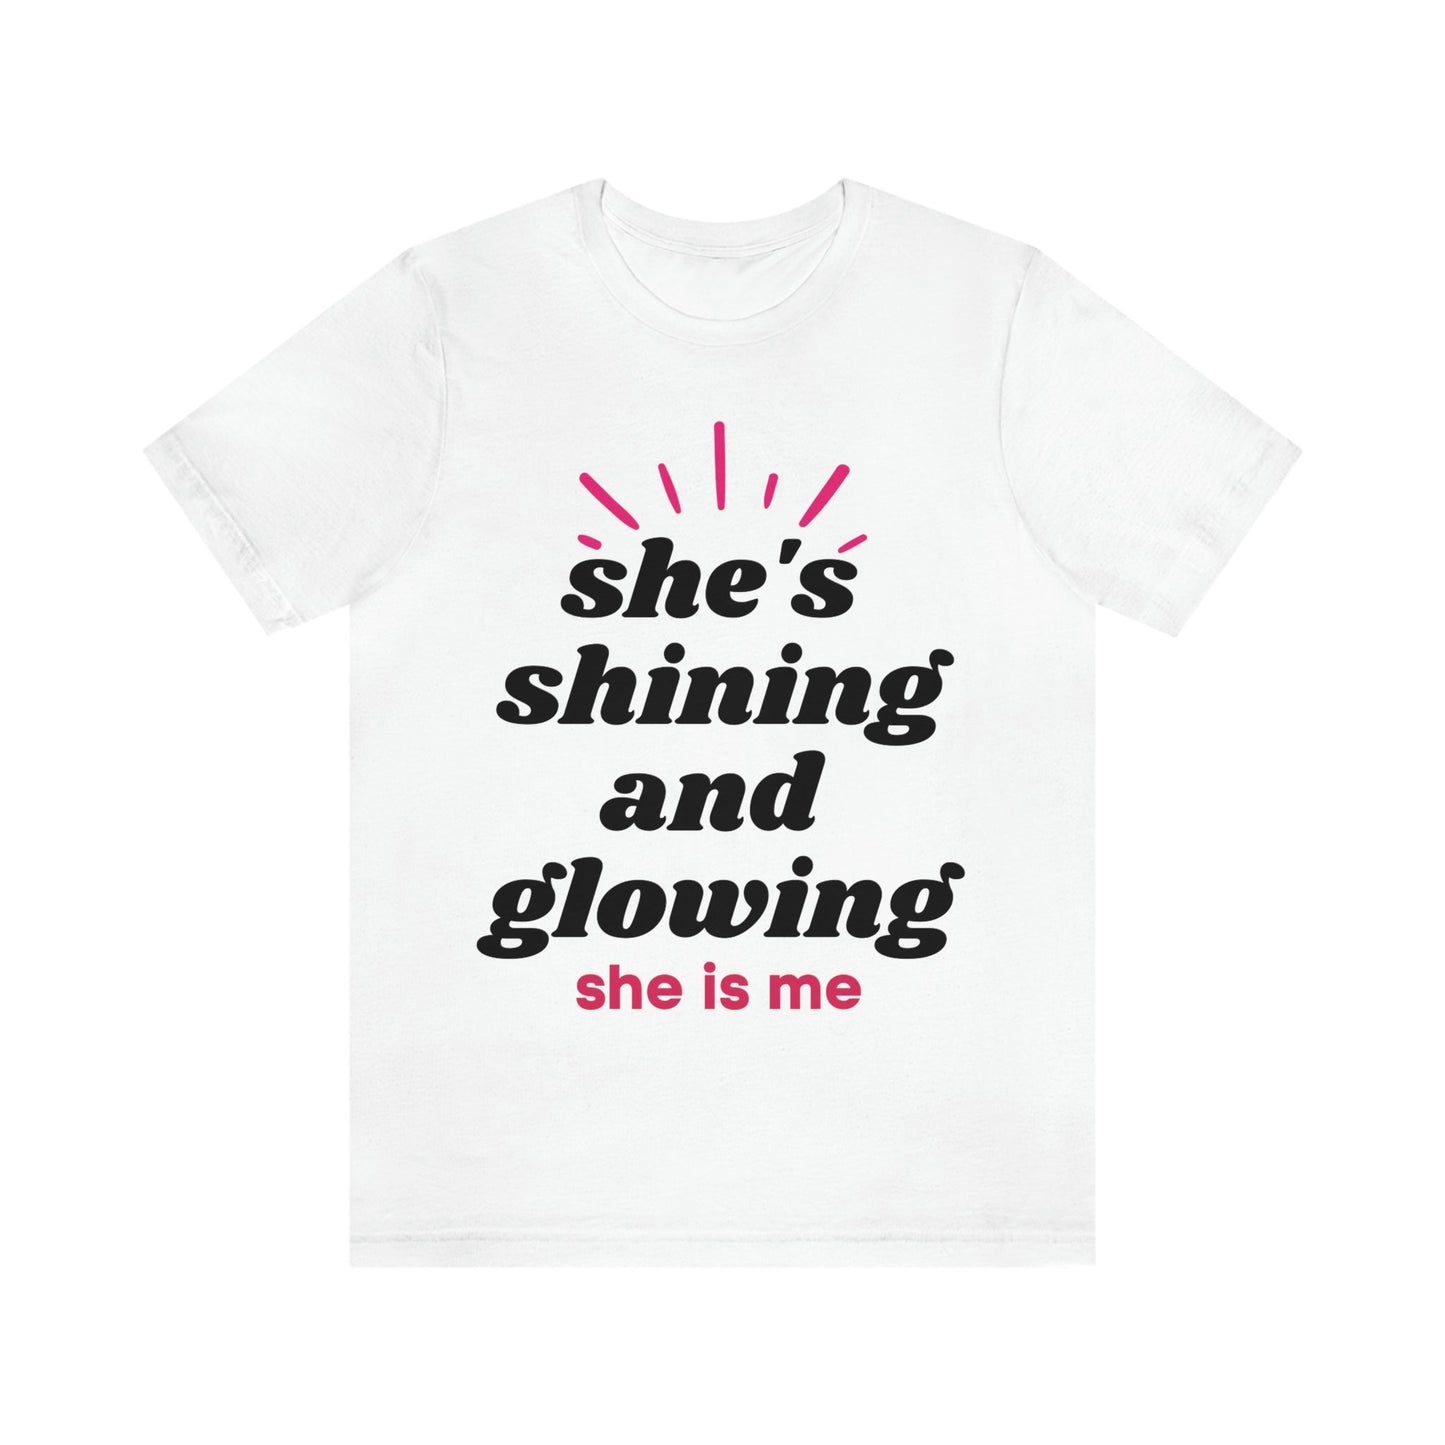 She's Shining and Glowing, She Is Me (Graphic Black Text) Unisex Jersey Short Sleeve Tee - Style: Bella+Canvas 3001